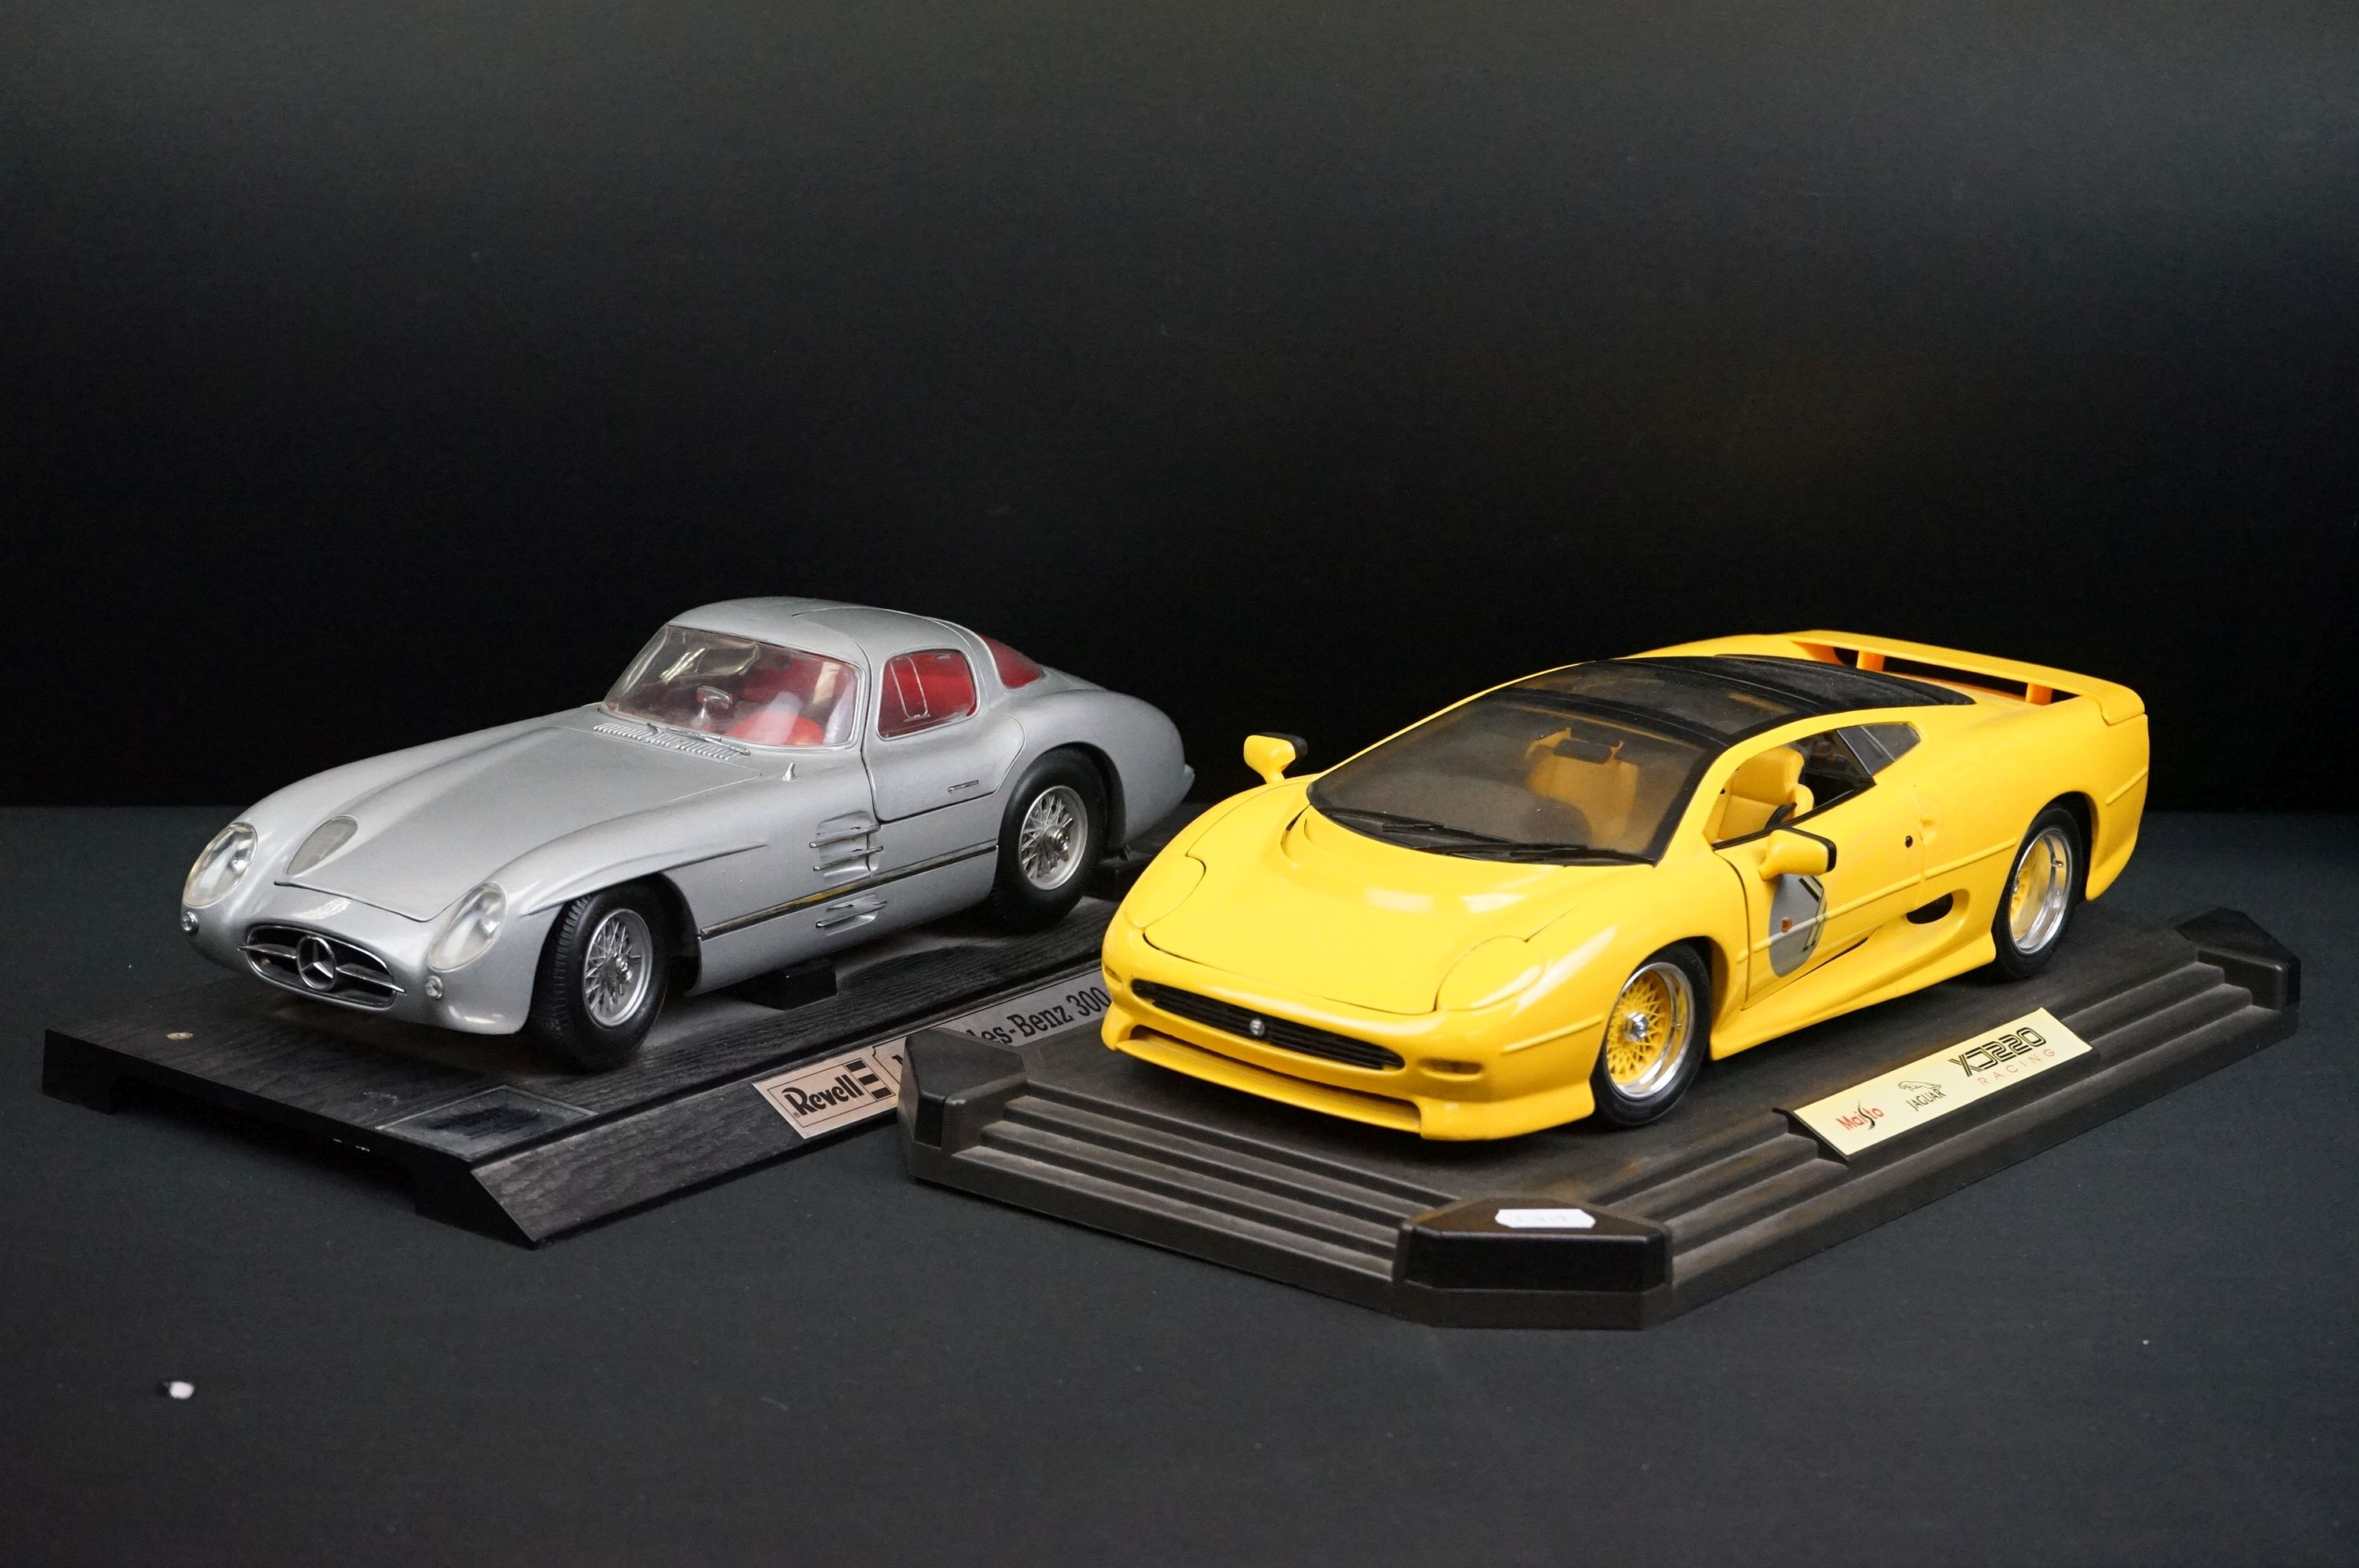 Four boxed Maisto 1/18 diecast models to include 3 x Premiere Edition (2 x Mercedes Benz SL Class, - Image 14 of 18